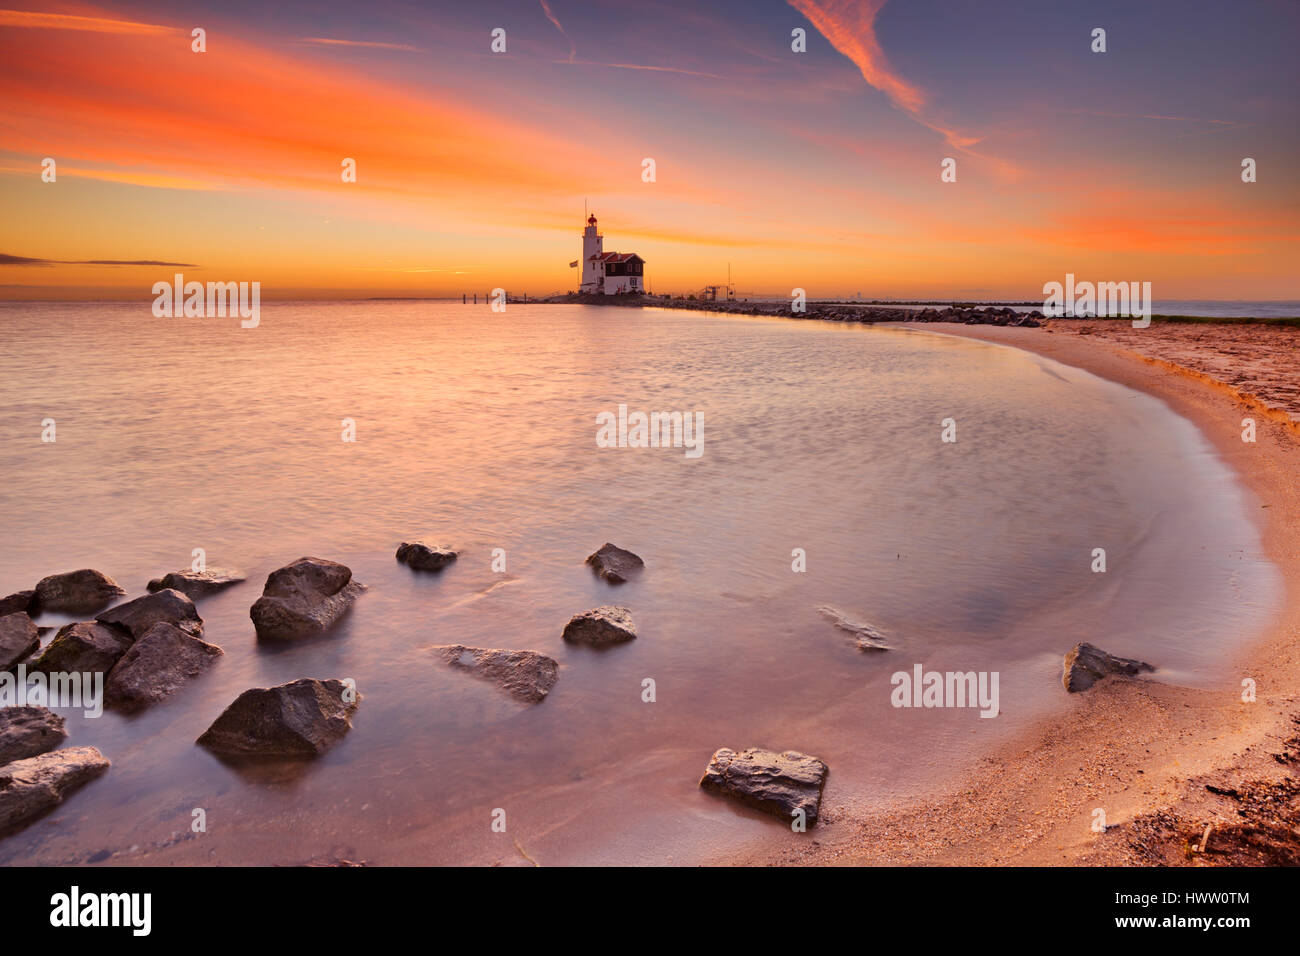 The lighthouse on the island of Marken in The Netherlands. Photographed at sunrise. Stock Photo